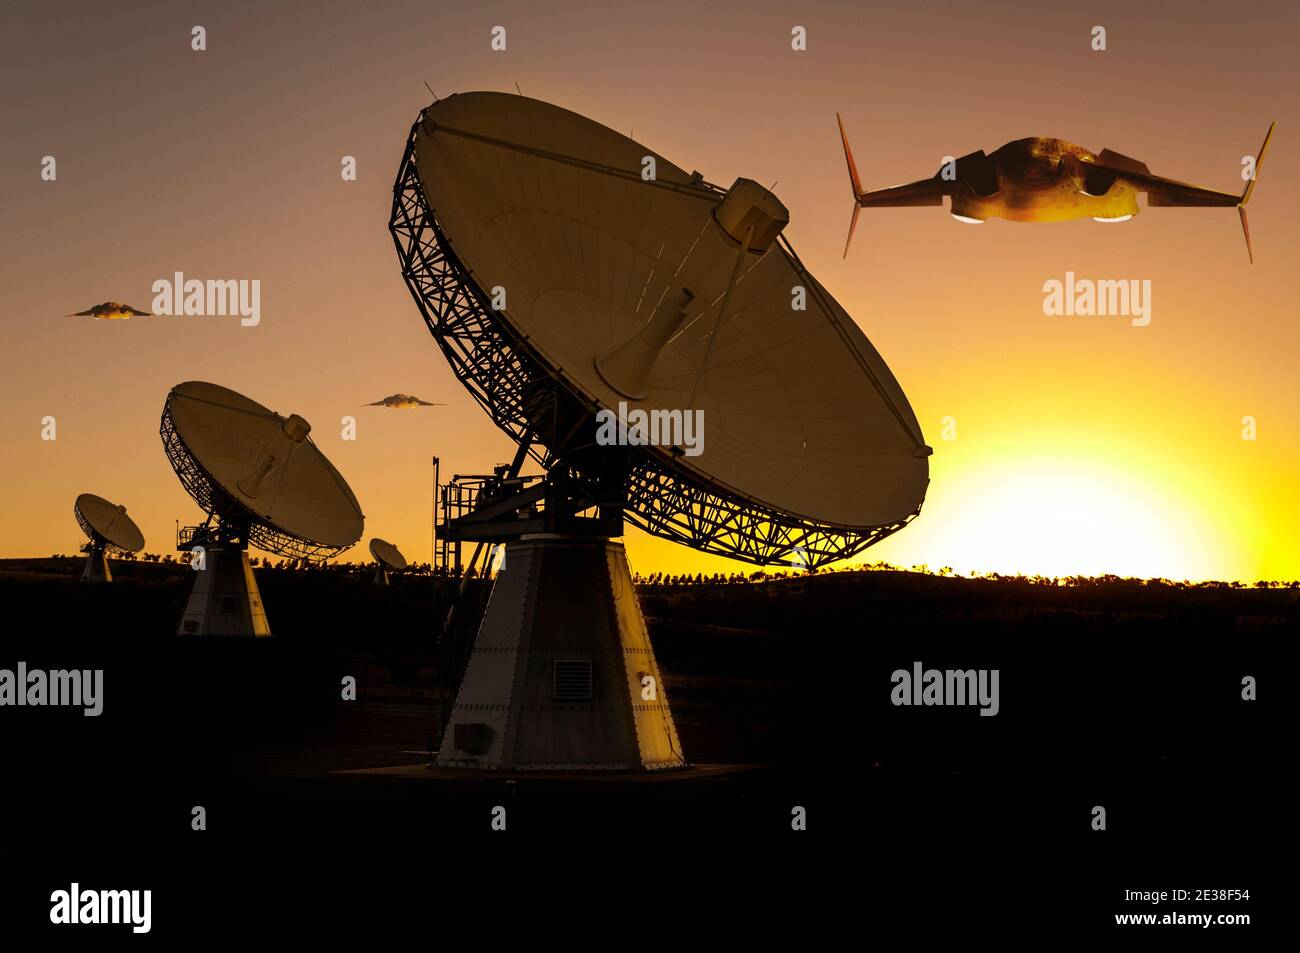 Three futuristic alien space craft approach an array of large telecommunication and satellite tracking dishes that face the sky at sunset. Stock Photo